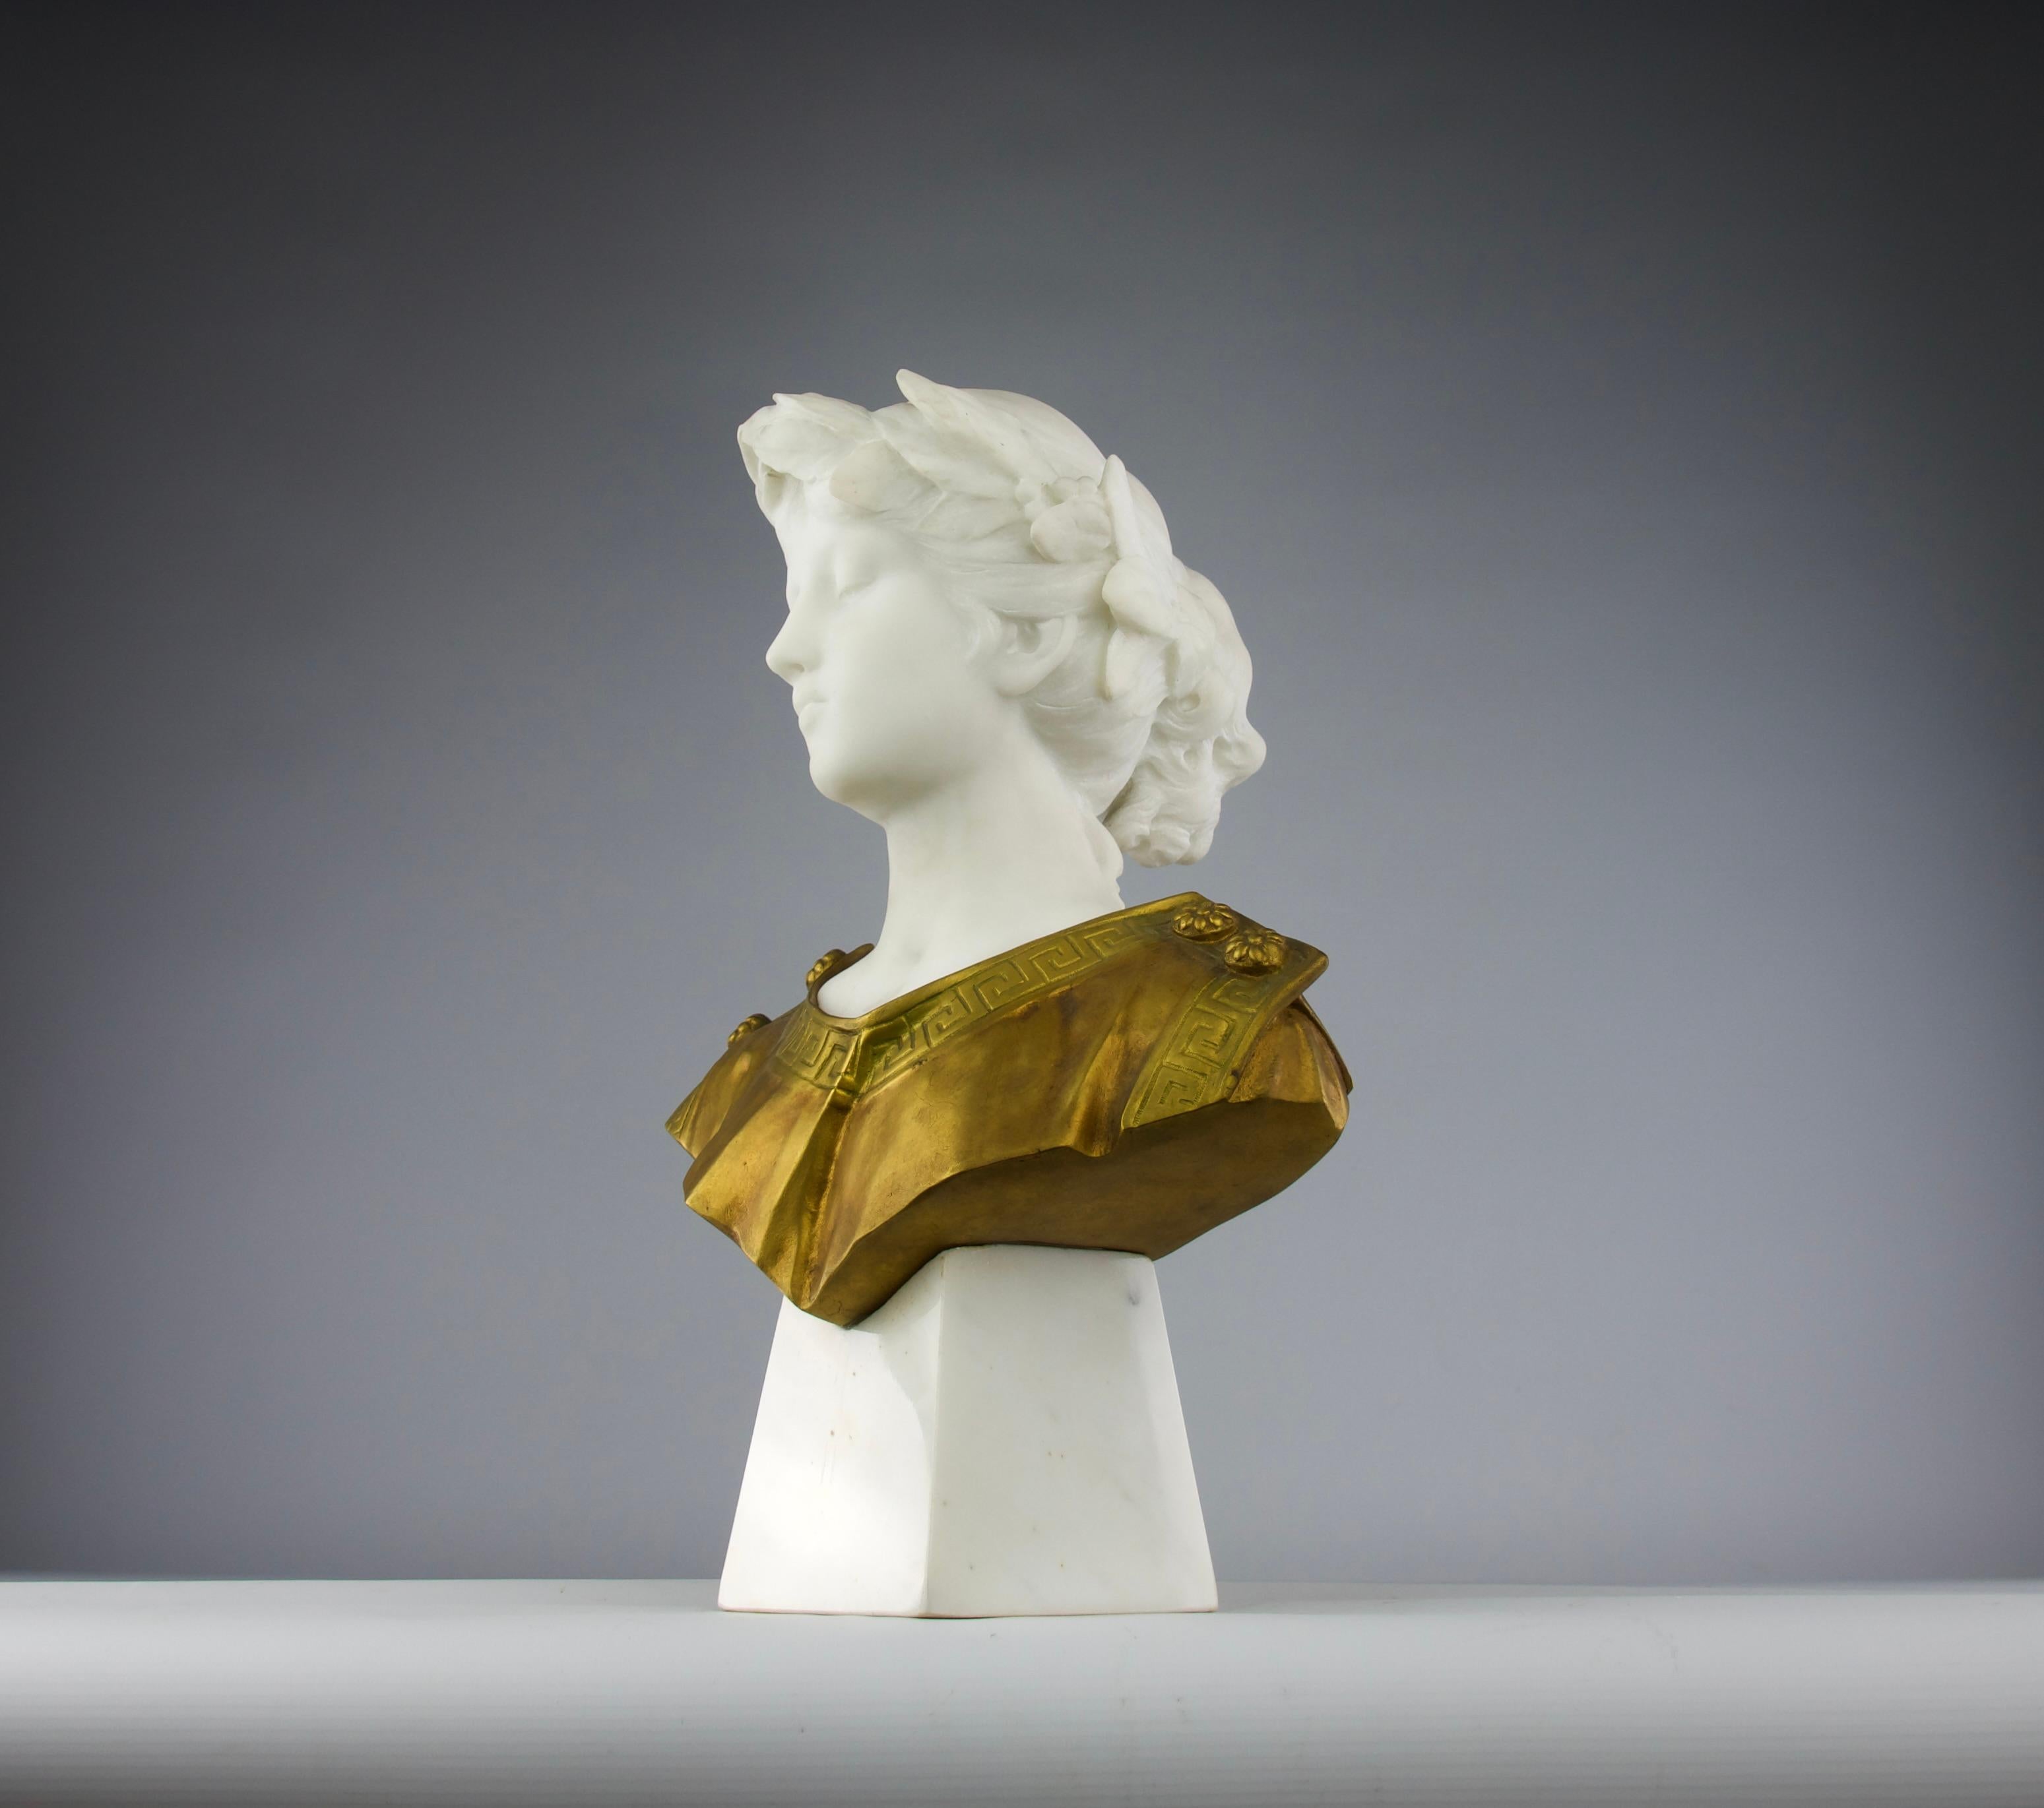 Gilt Attilio Fagioli, Young Emperor Bust Sculpture, Italy Early 20th Century For Sale